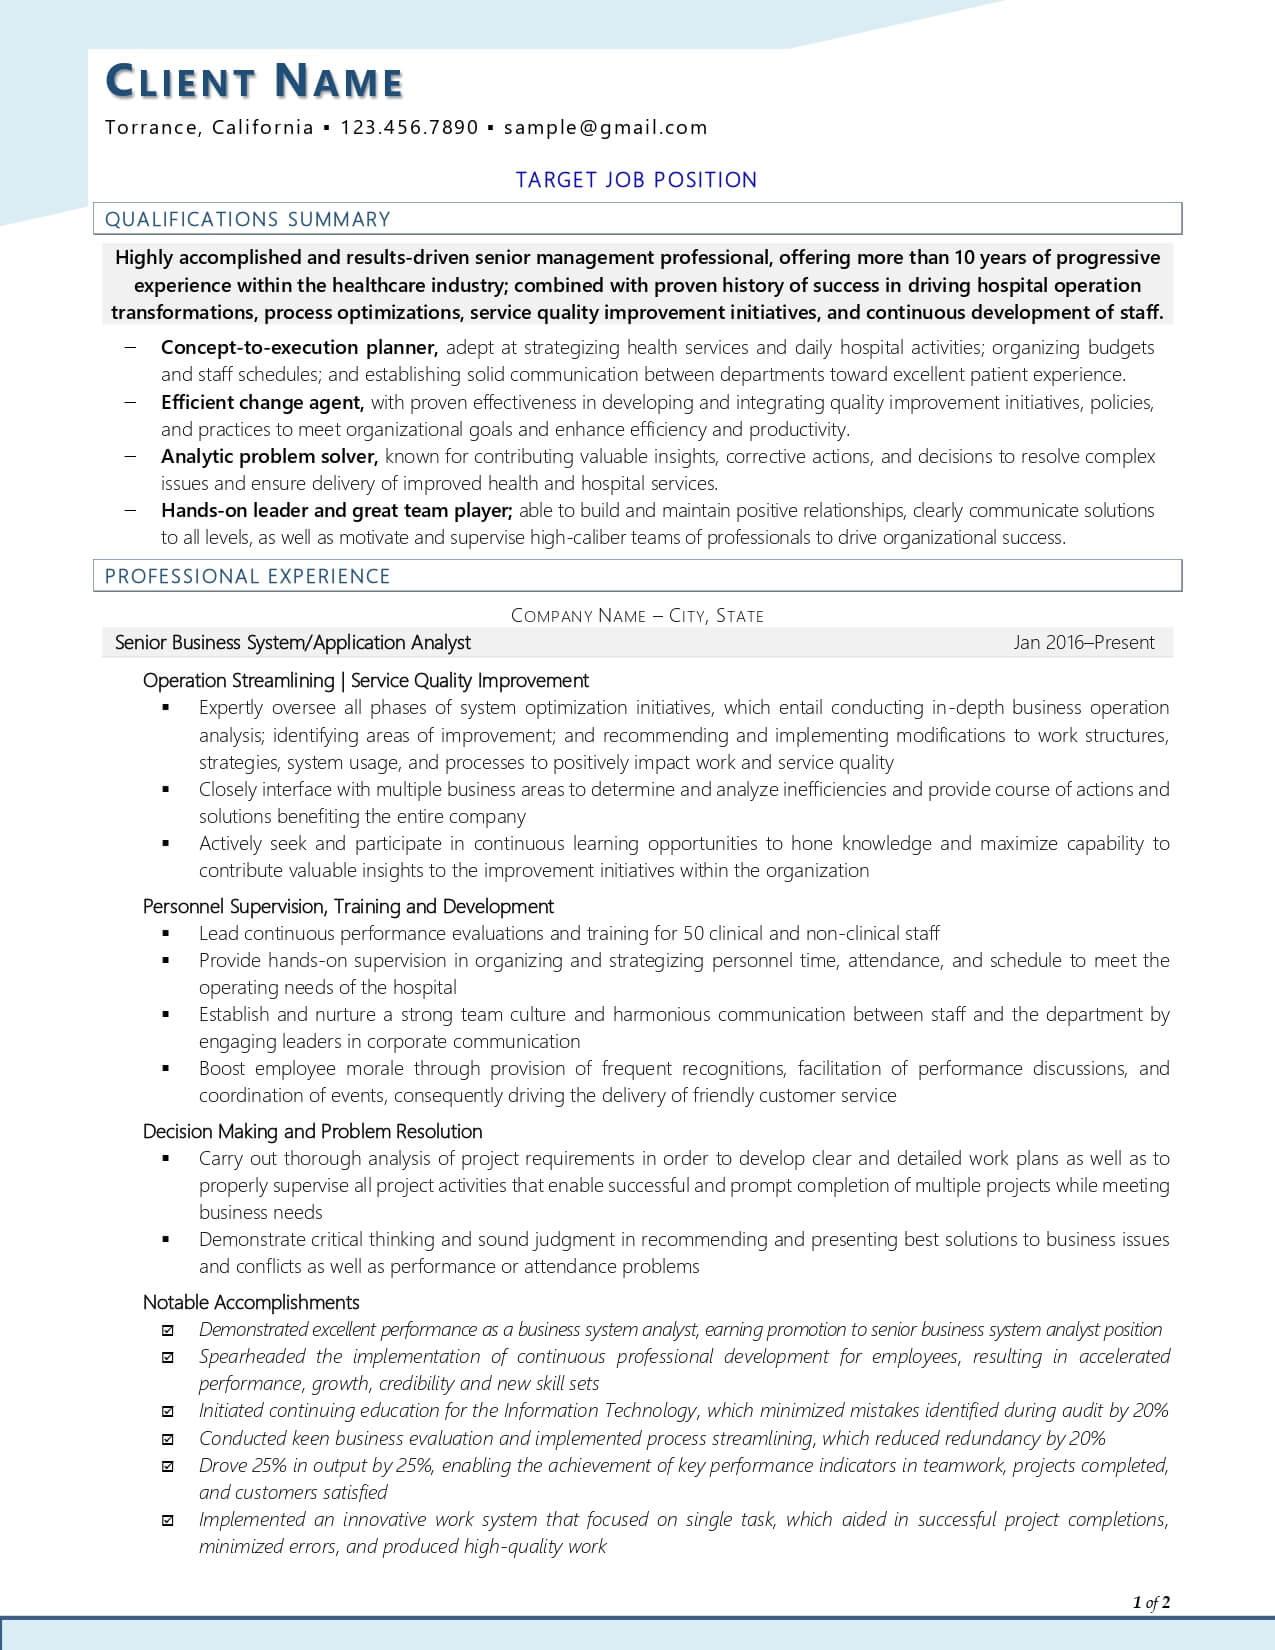 ResuMeds healthcare business analyst resume example page one